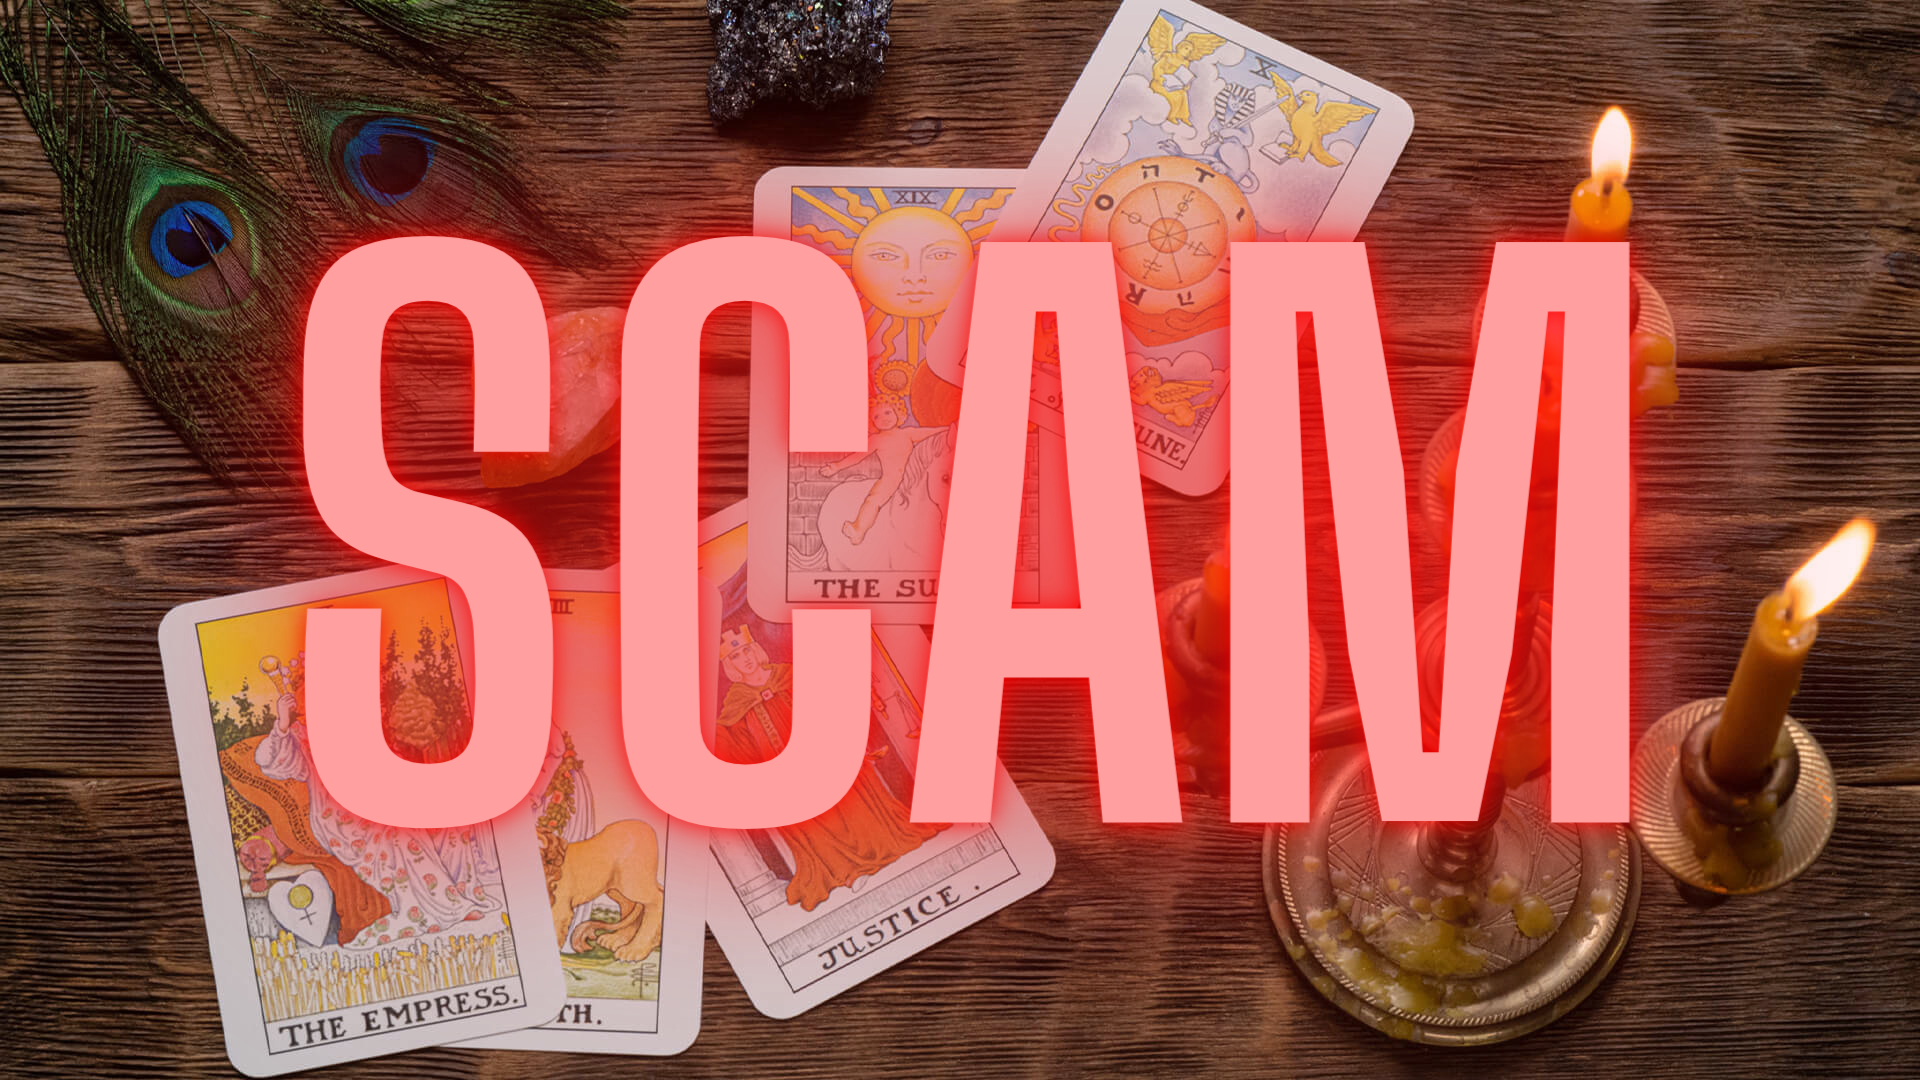 Tarot cards with candles and words "scam"